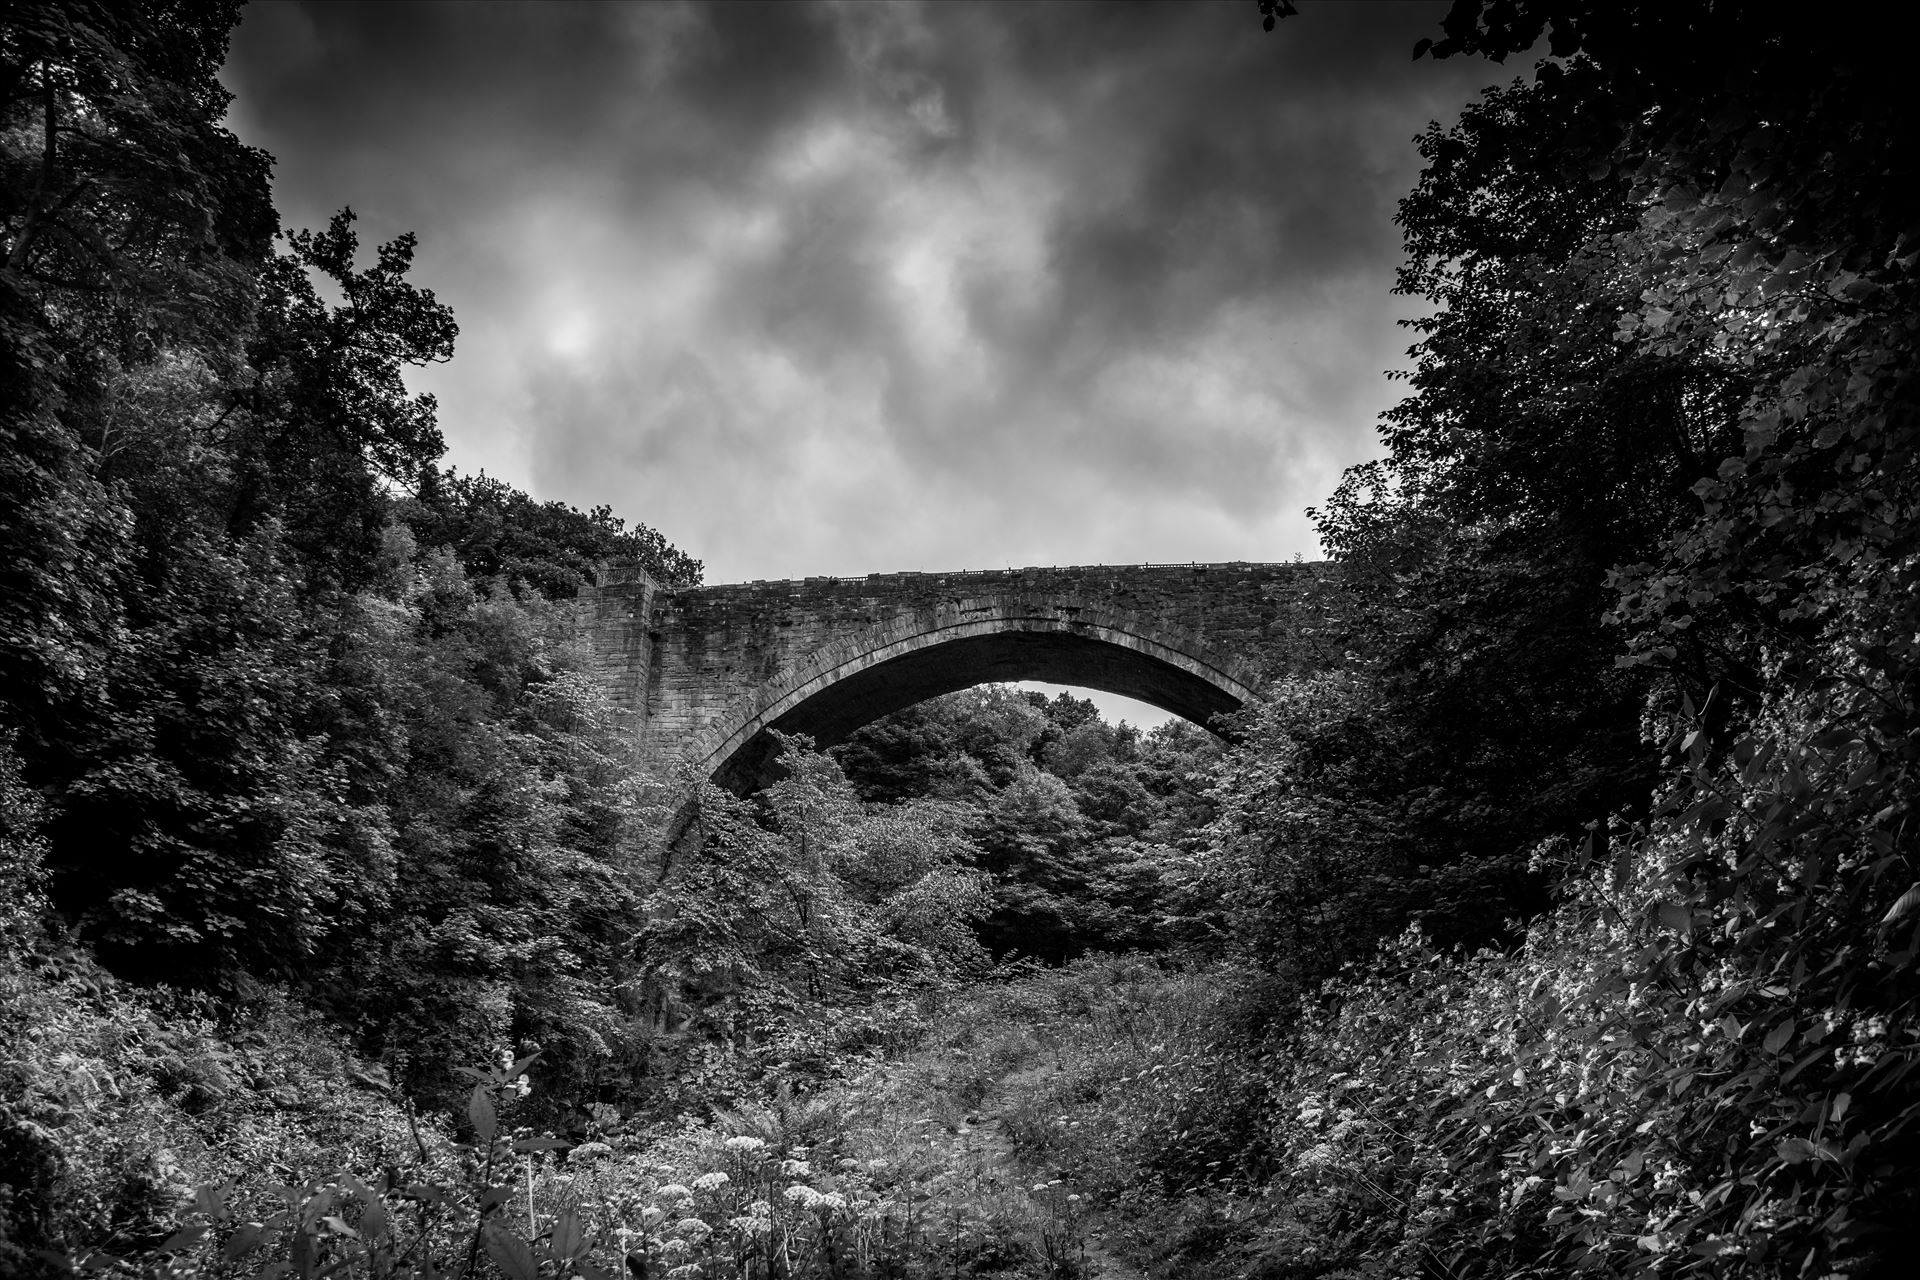 Causey Arch The Causey Arch is a bridge near Stanley in County Durham. It is the oldest surviving single-arch railway bridge in the world. When the bridge was completed in 1726, it was the longest single-span bridge in the country. by philreay